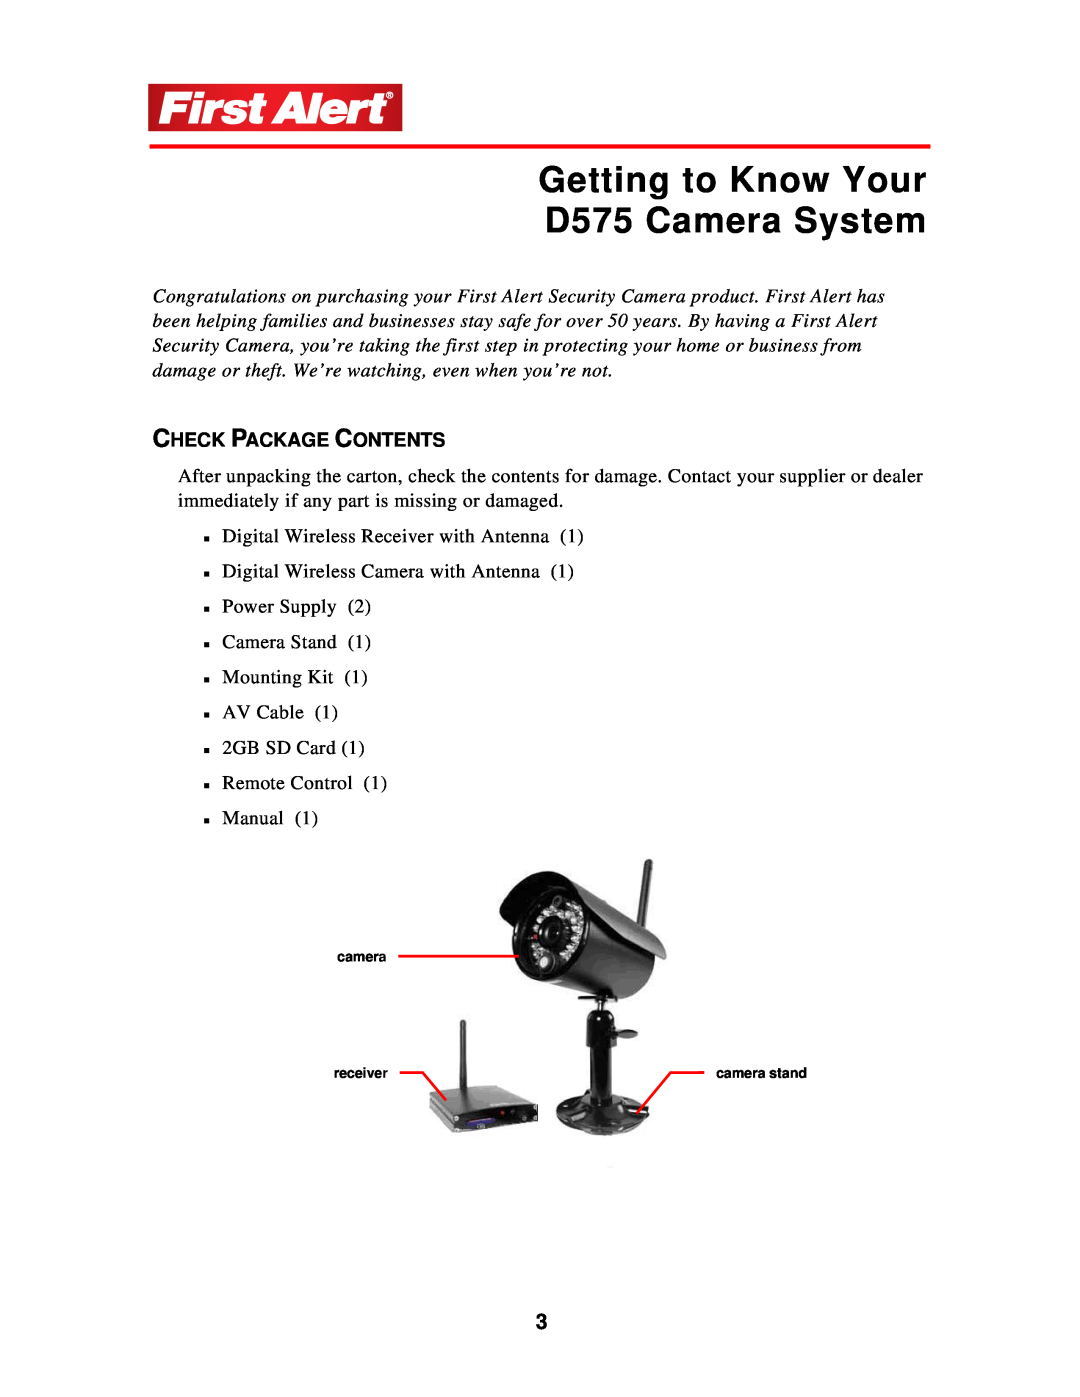 First Alert user manual Getting to Know Your D575 Camera System, Check Package Contents 